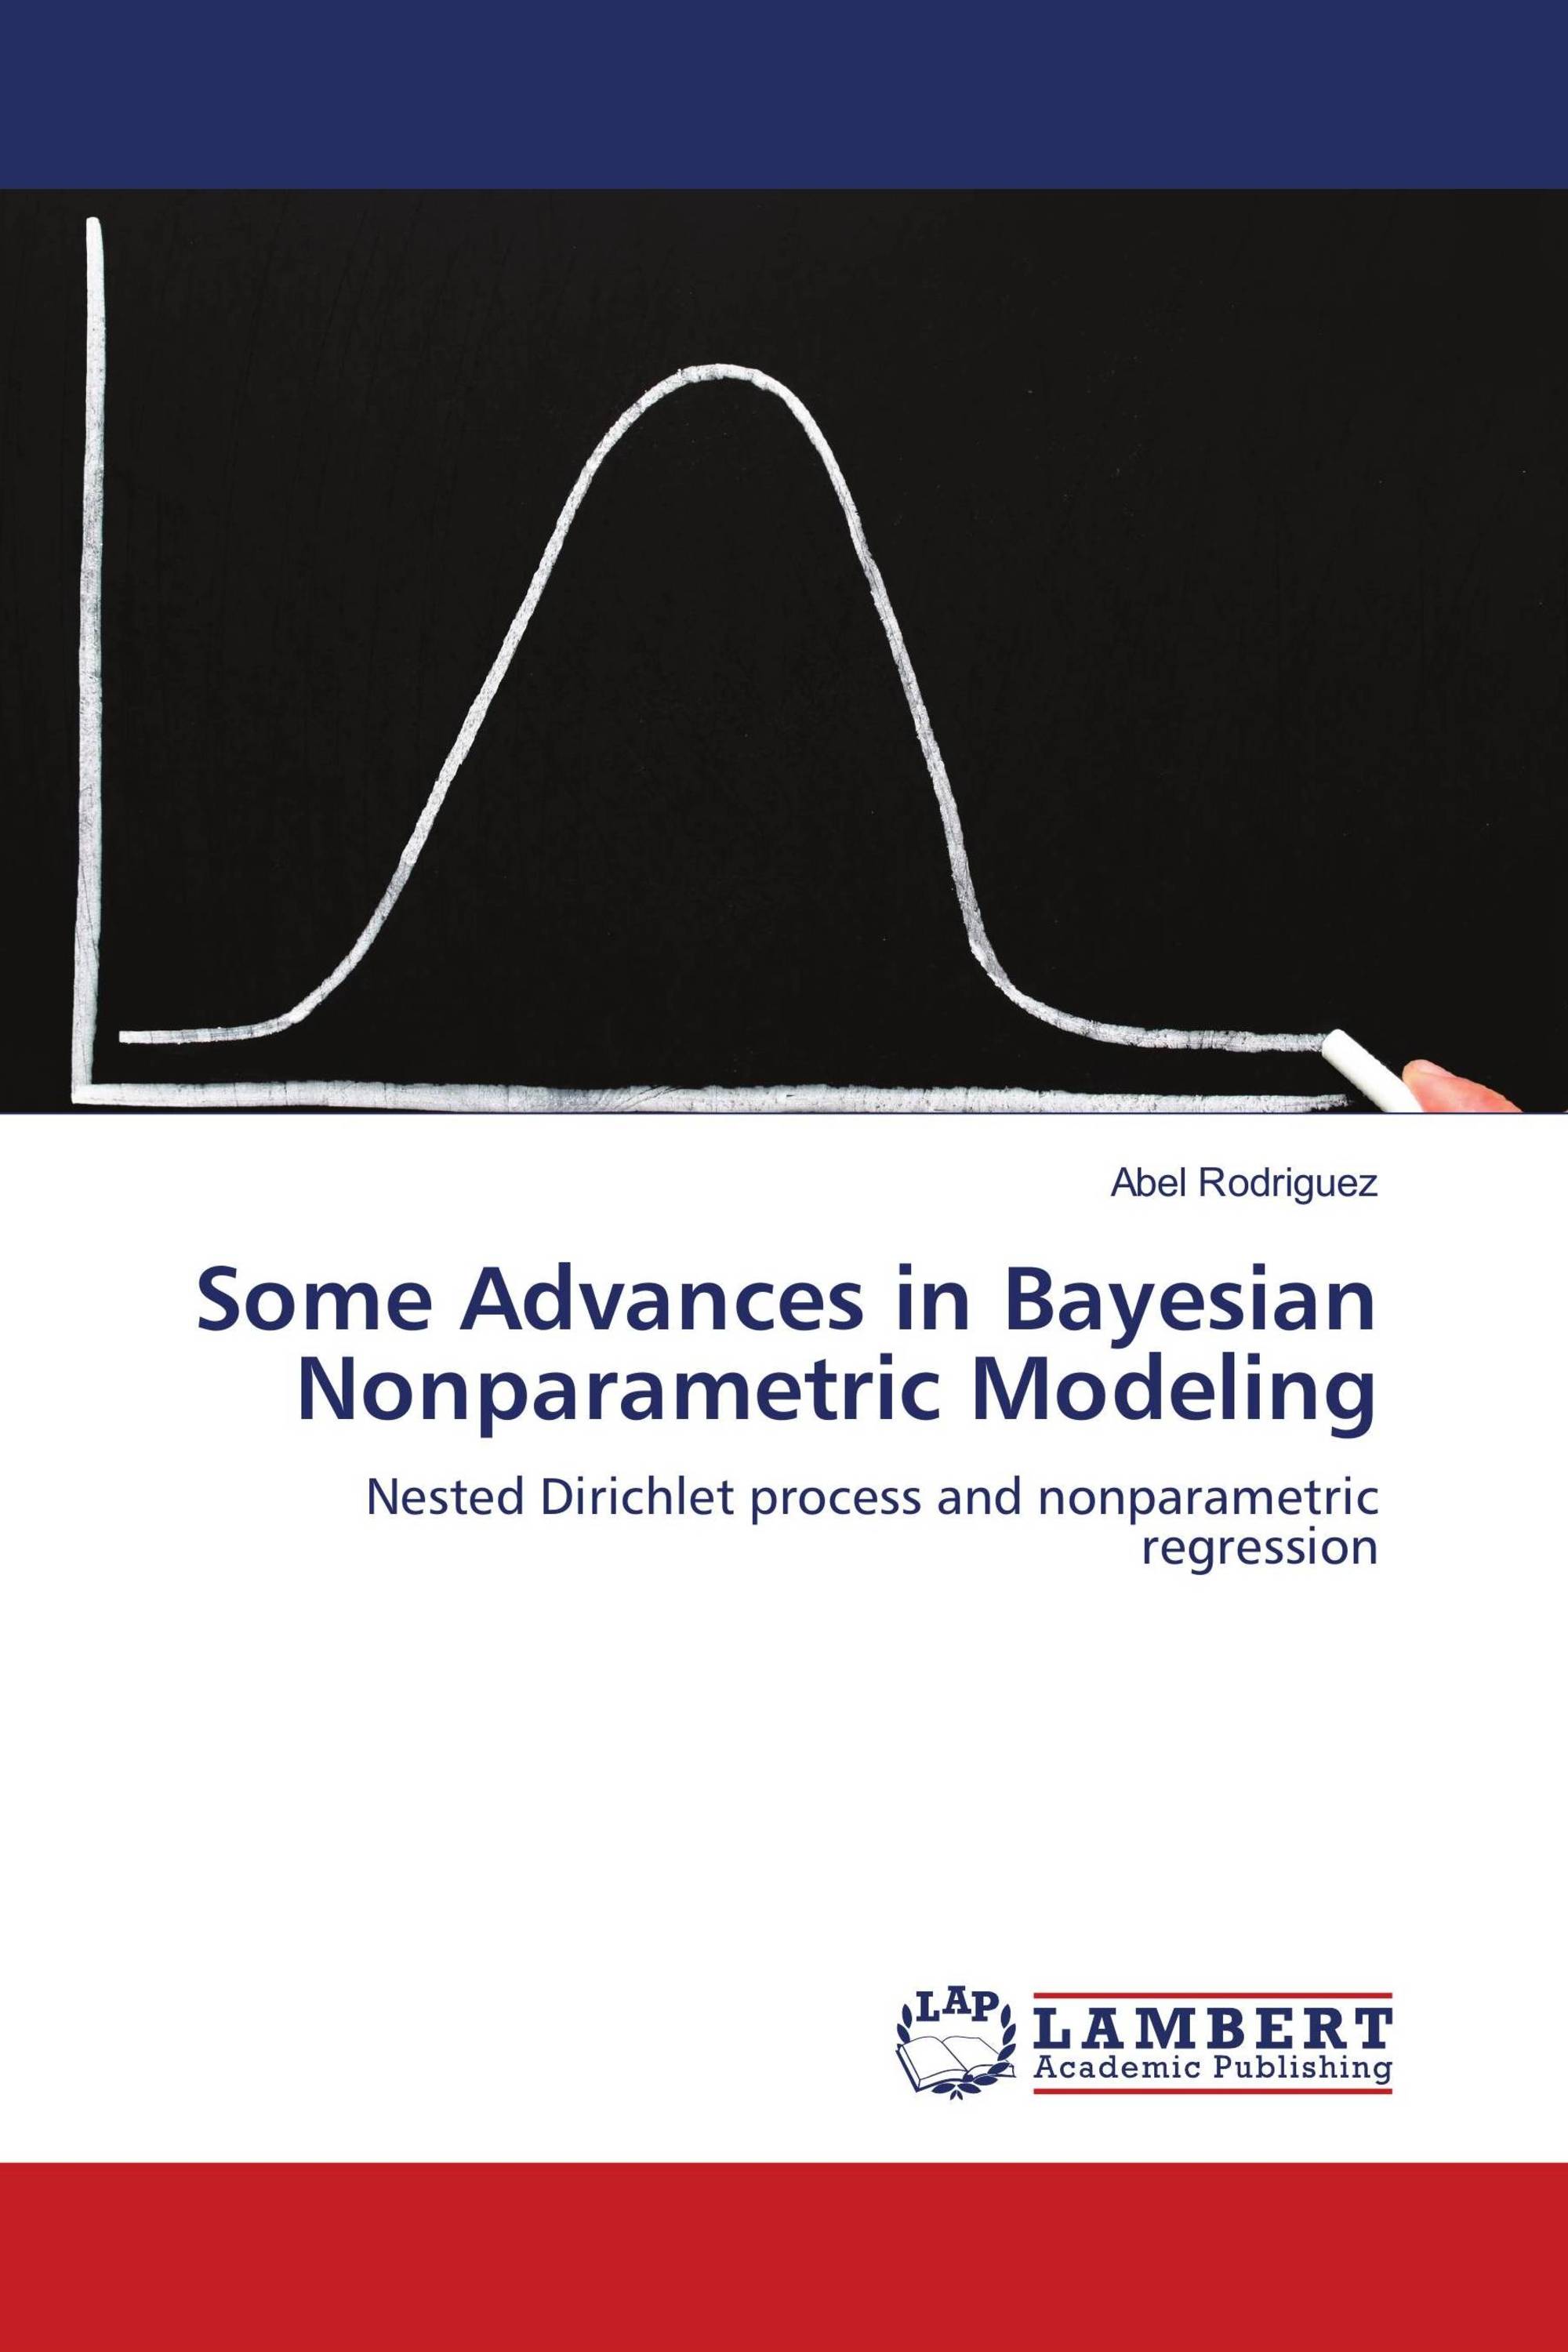 Some Advances in Bayesian Nonparametric Modeling